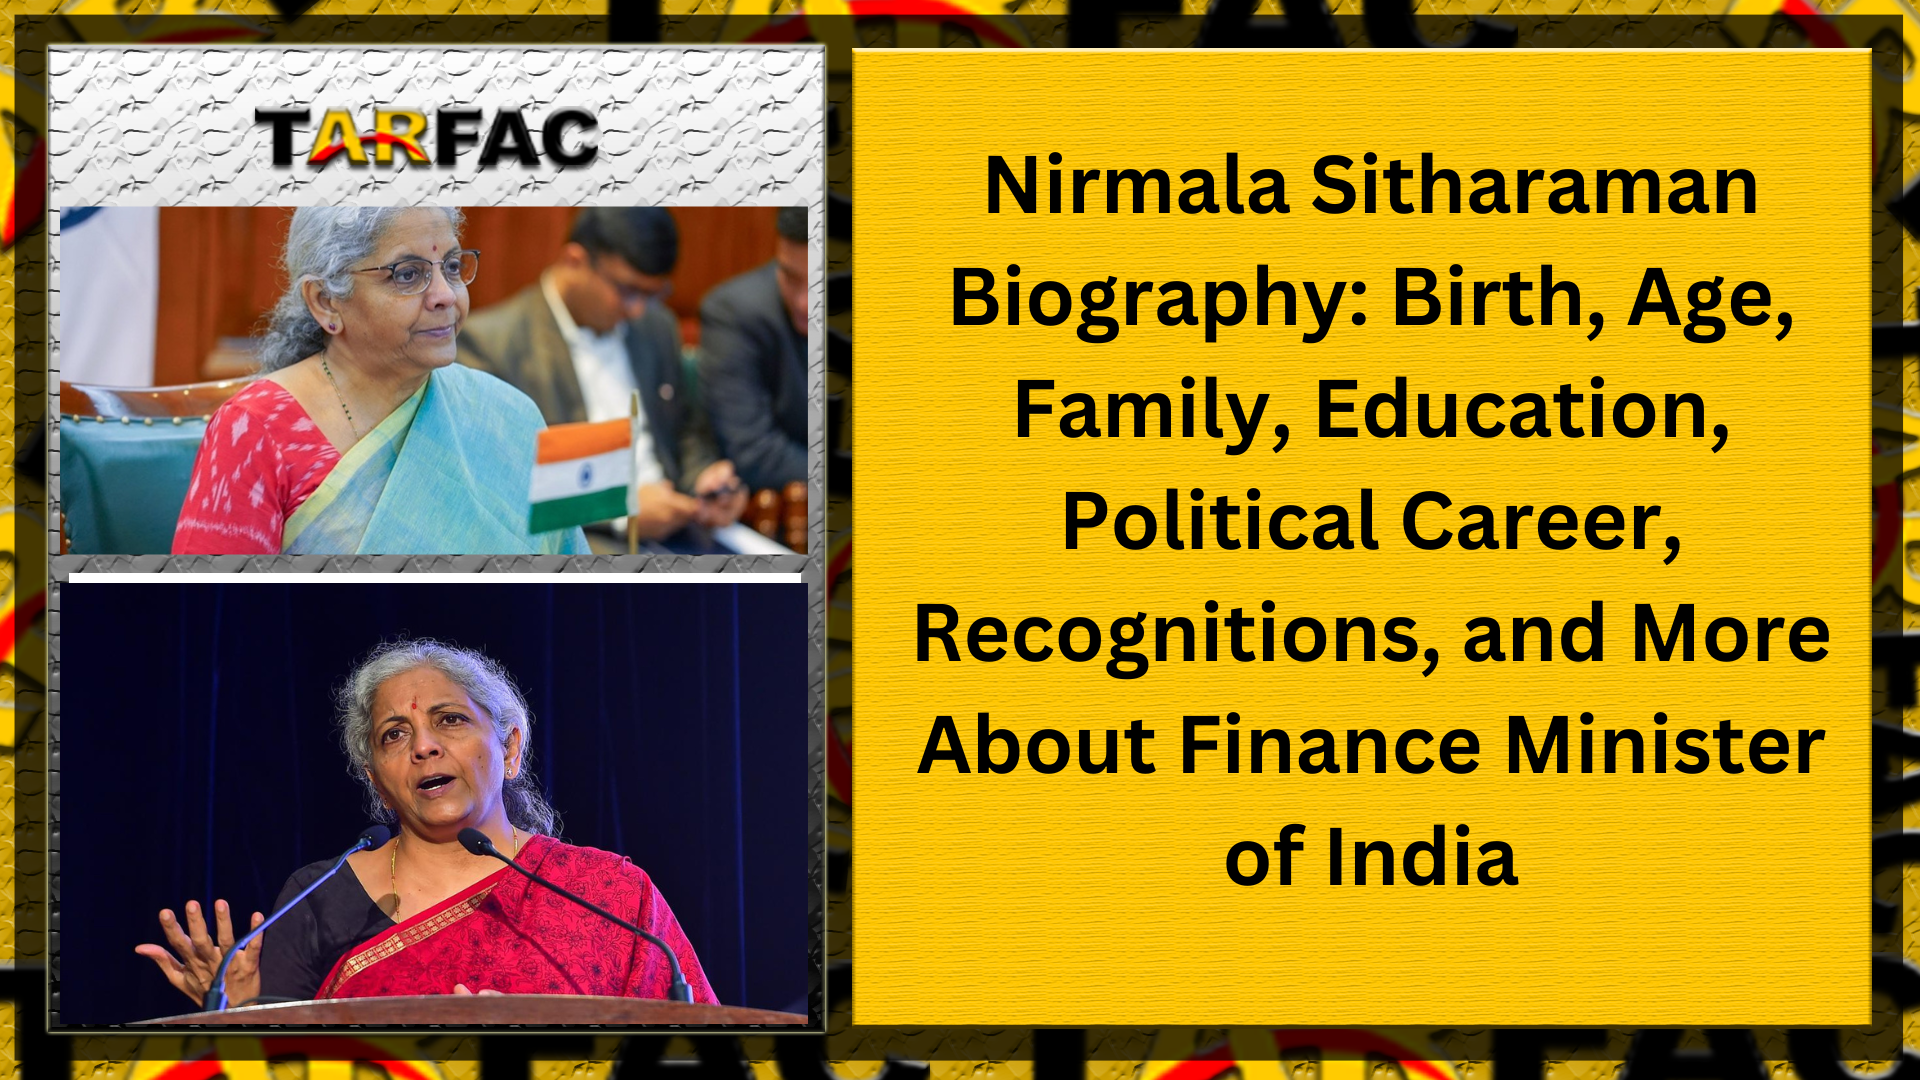 You are currently viewing Nirmala Sitharaman Biography: Birth, Age, Family, Education, Political Career, Recognitions, and More About Finance Minister of India